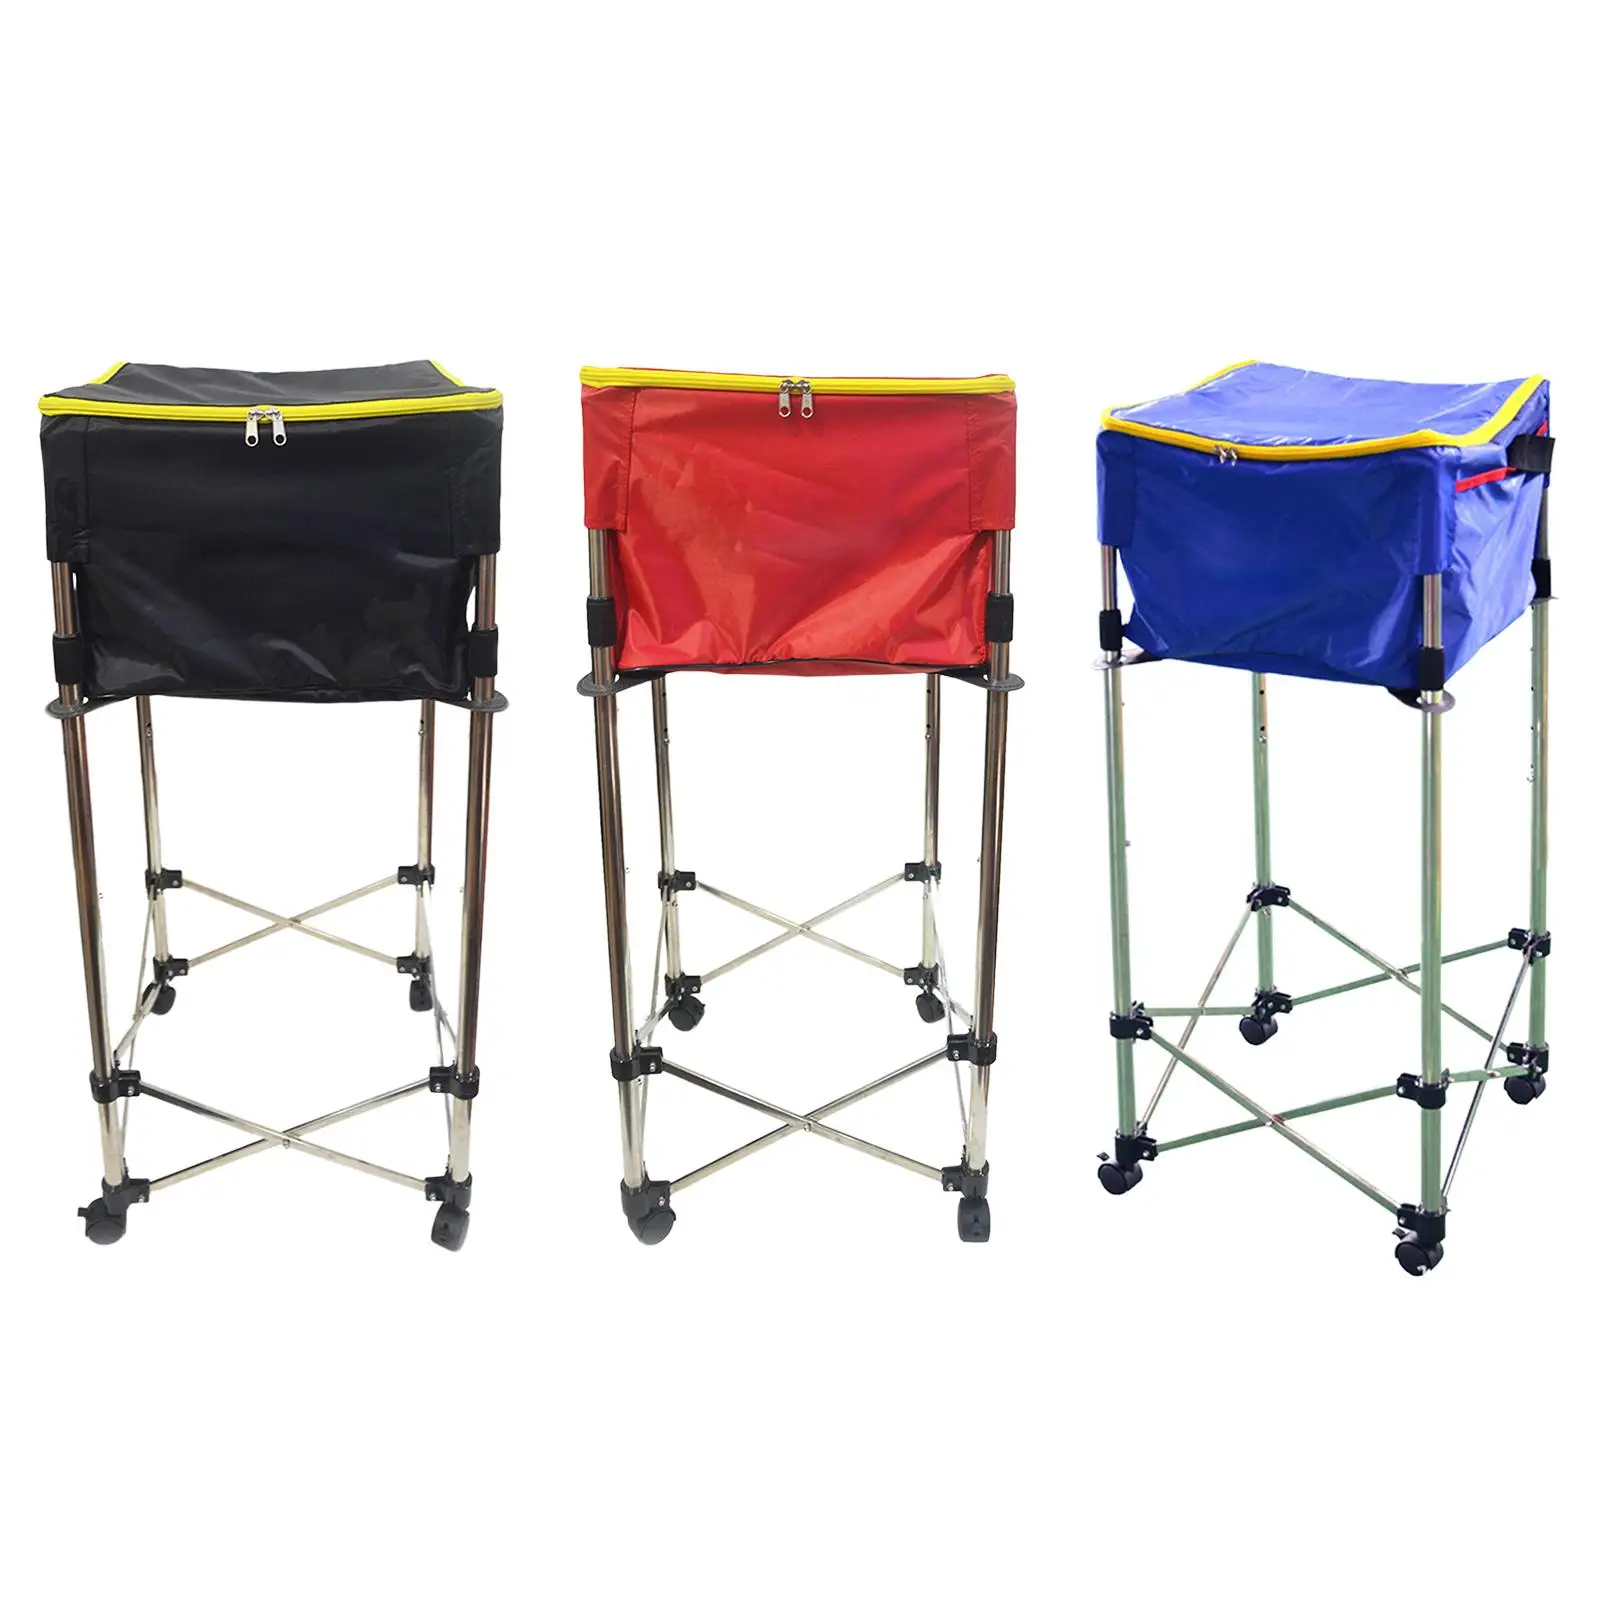 Tennis Ball Cart Removable Professional Large Capacity Tennis Ball Collection Cart with Wheels for Baseball Softball Tennis Ball